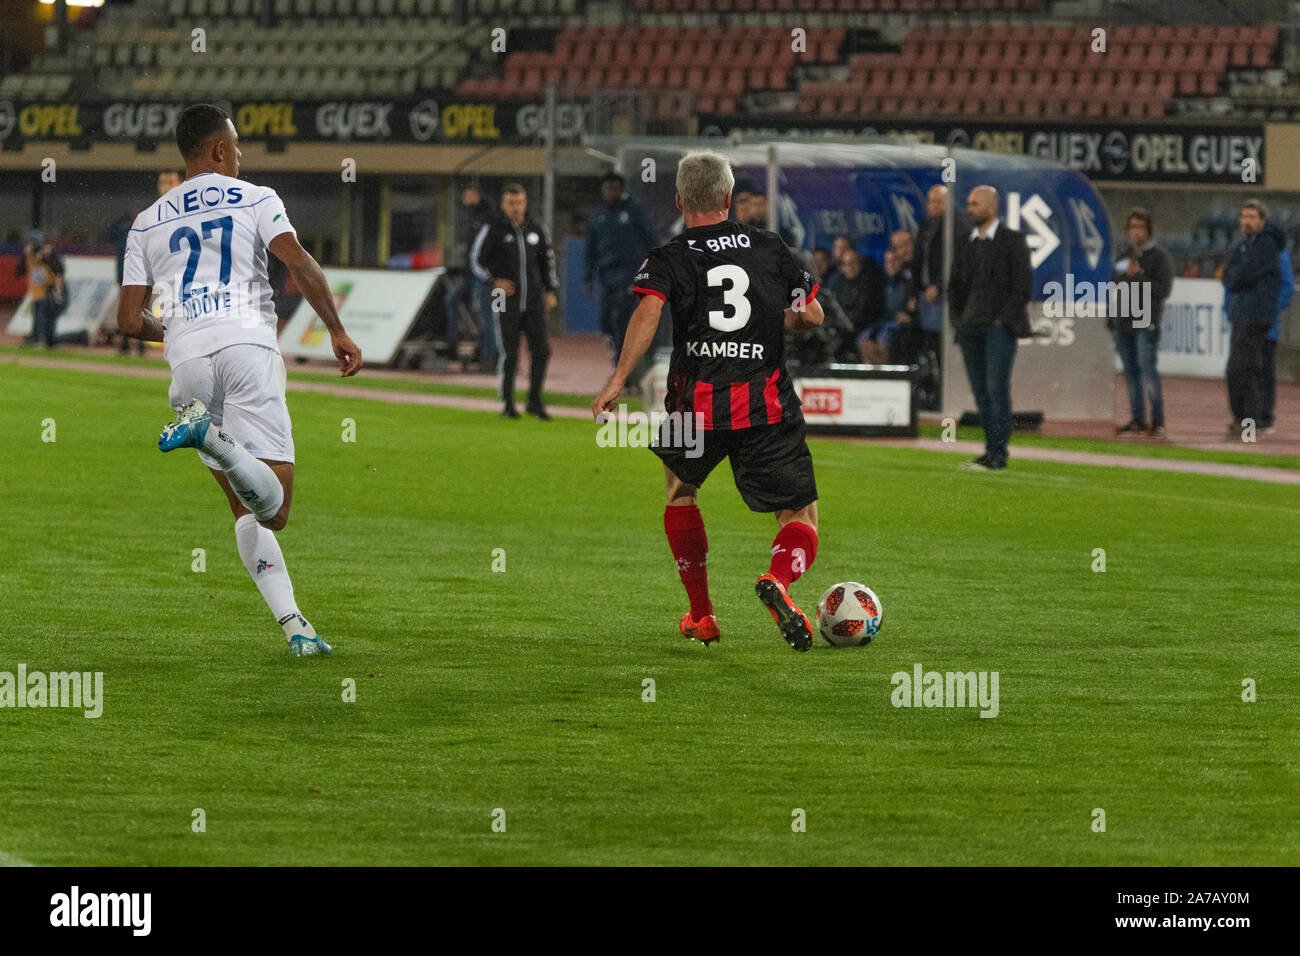 Lausanne, Switzerland. 31st Oct, 2019. Janick Kamber of Neuchâtel Xamax checks during the Swiss Football Cup match between Lausanne Sport and Neuchâtel Xamax. Lausanne Sport wins 6-0. (Photo by Eric Dubost/Pacific Press) Credit: Pacific Press Agency/Alamy Live News Stock Photo